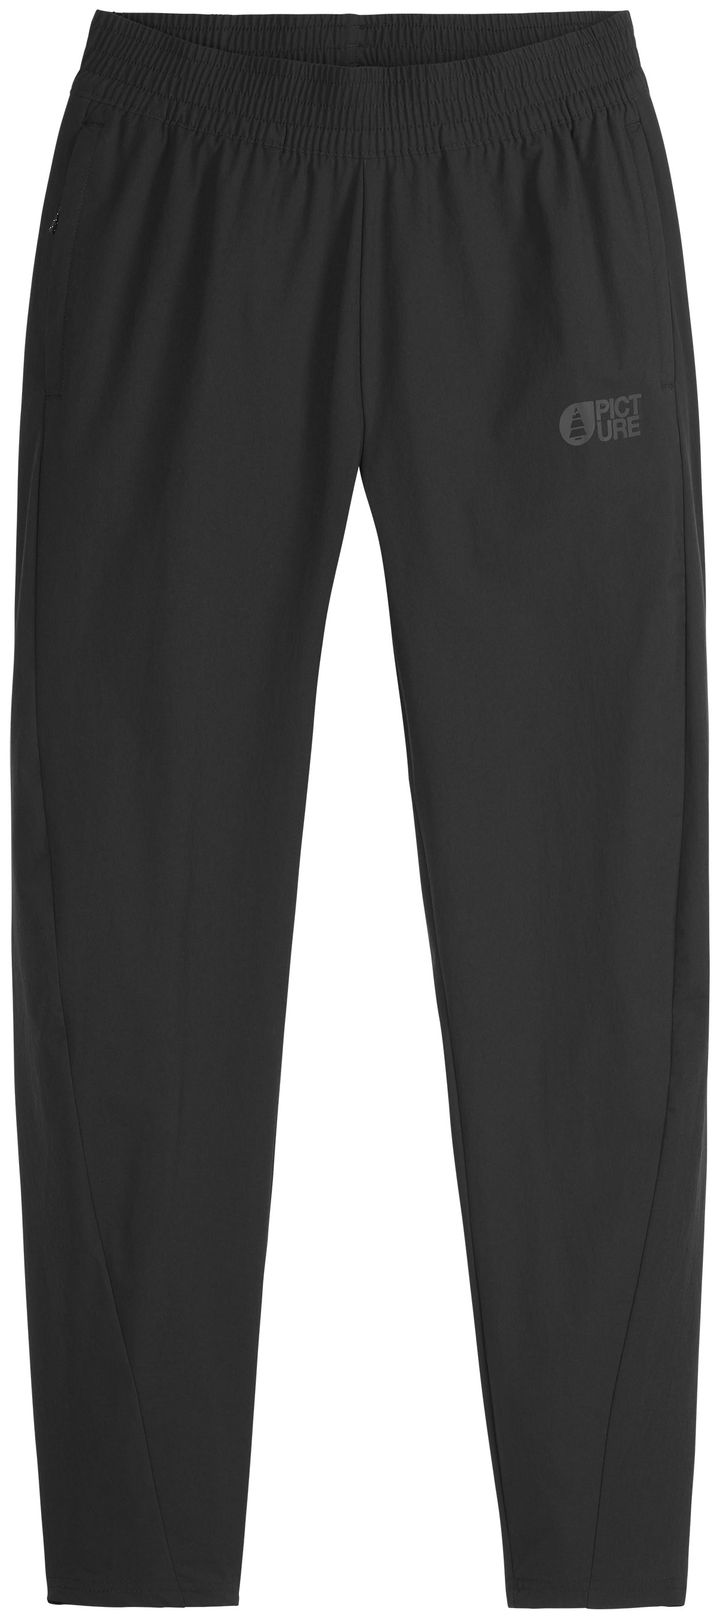 Picture Organic Clothing Women's Tulee Stretch Pants Black Picture Organic Clothing